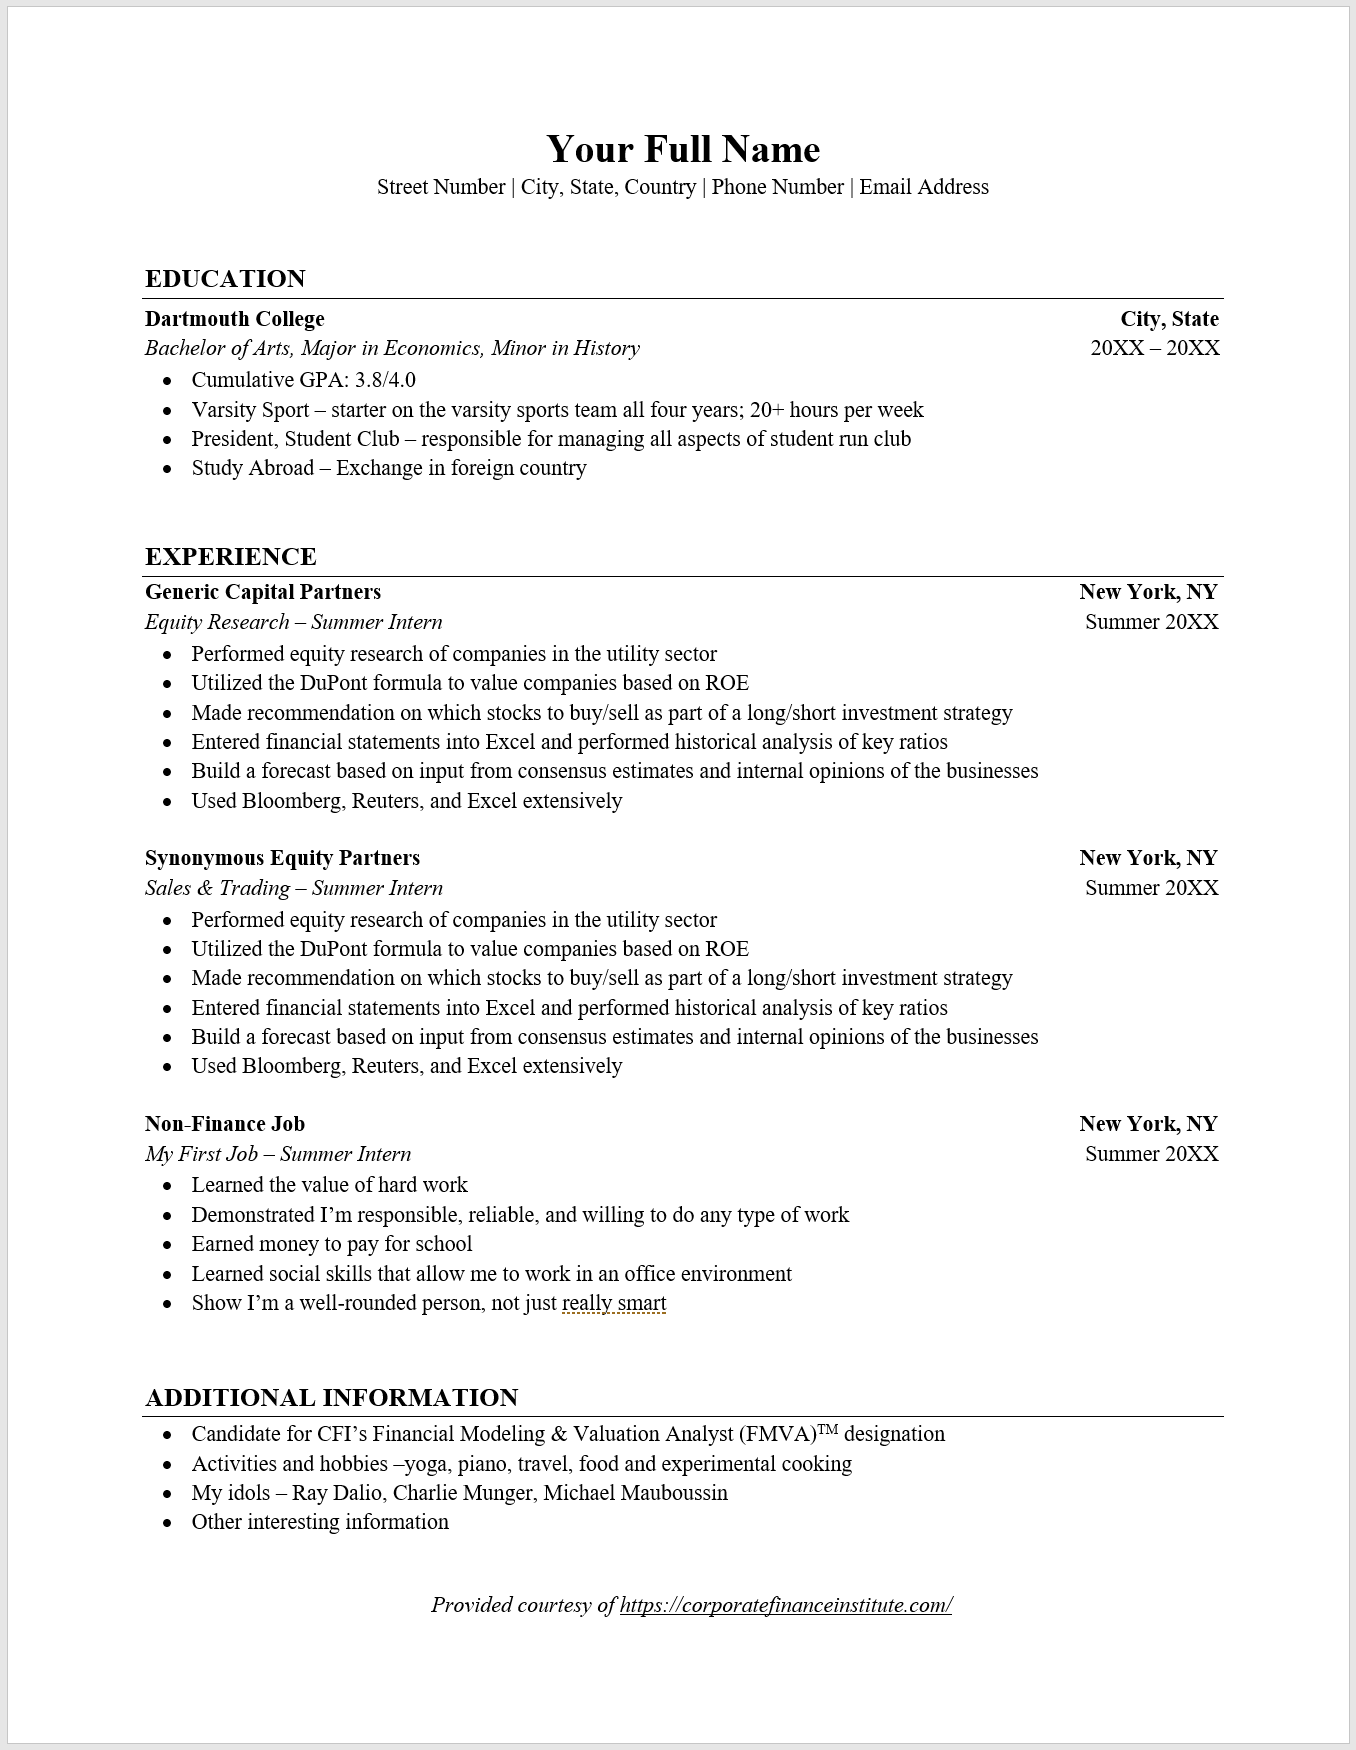 Official Resume Format from corporatefinanceinstitute.com